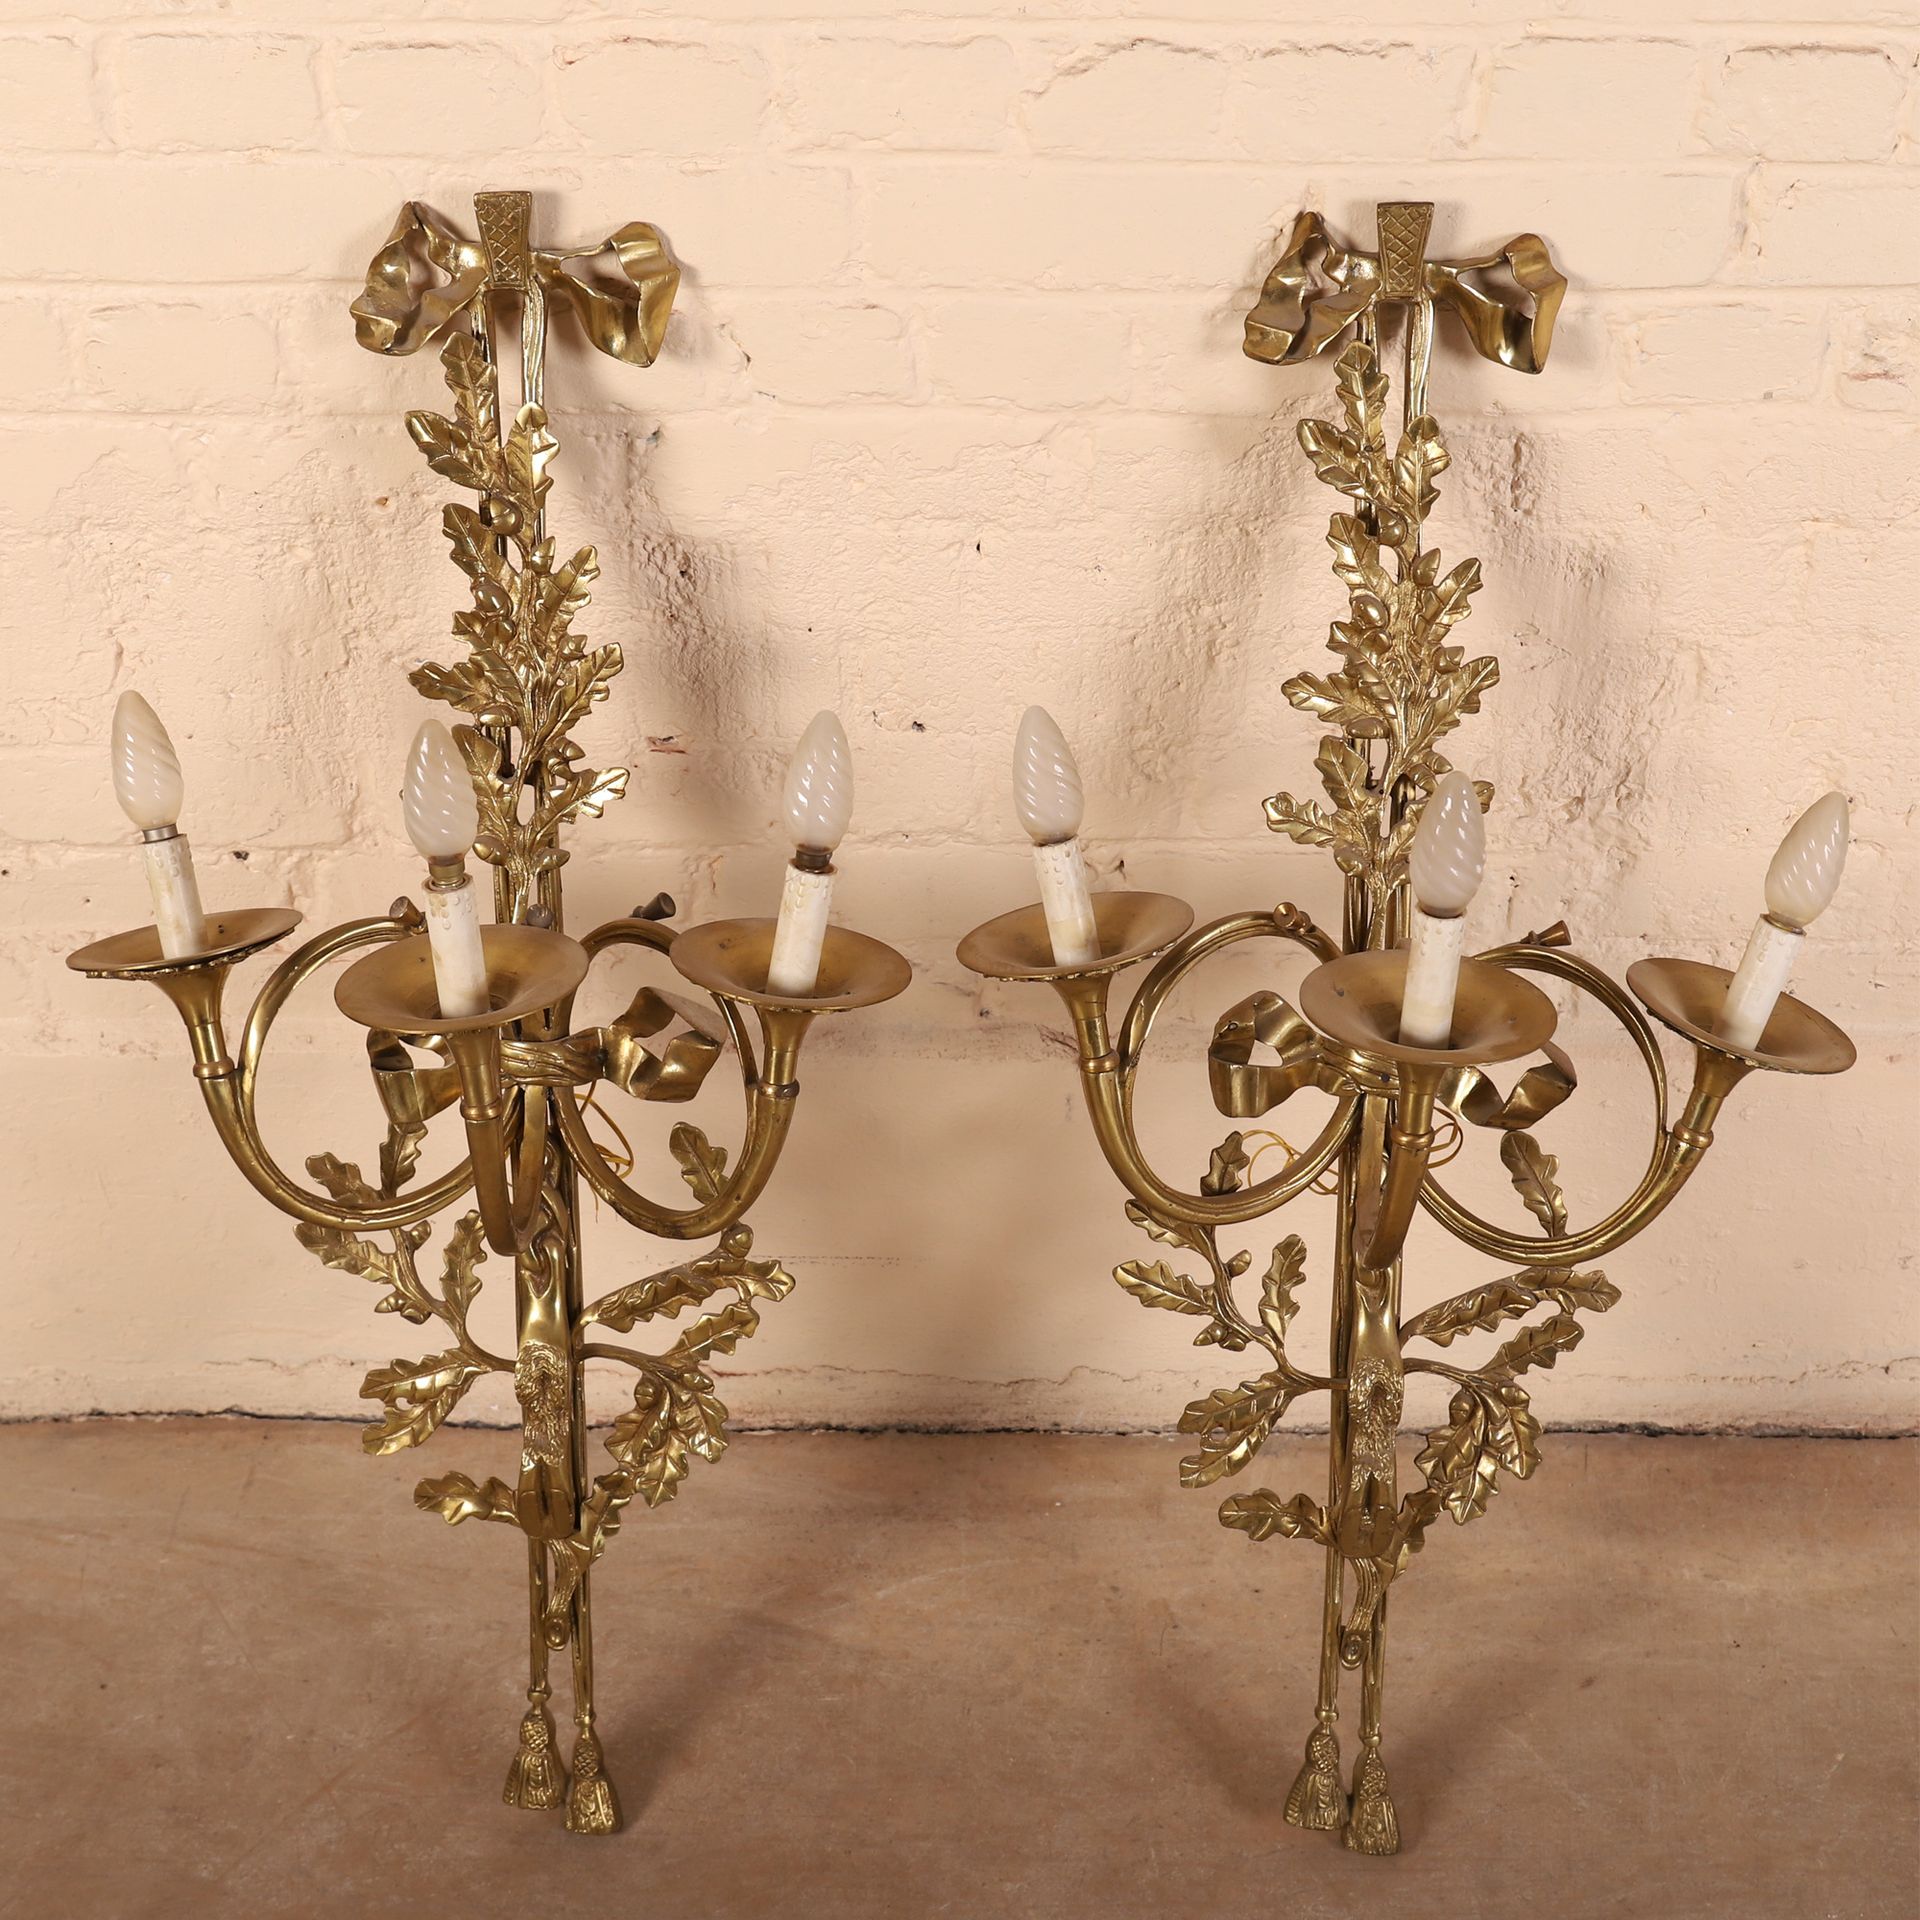 Null PAIR OF GOLDEN BRONZE LIGHTS 20th century

Three arms of lights in the shap&hellip;